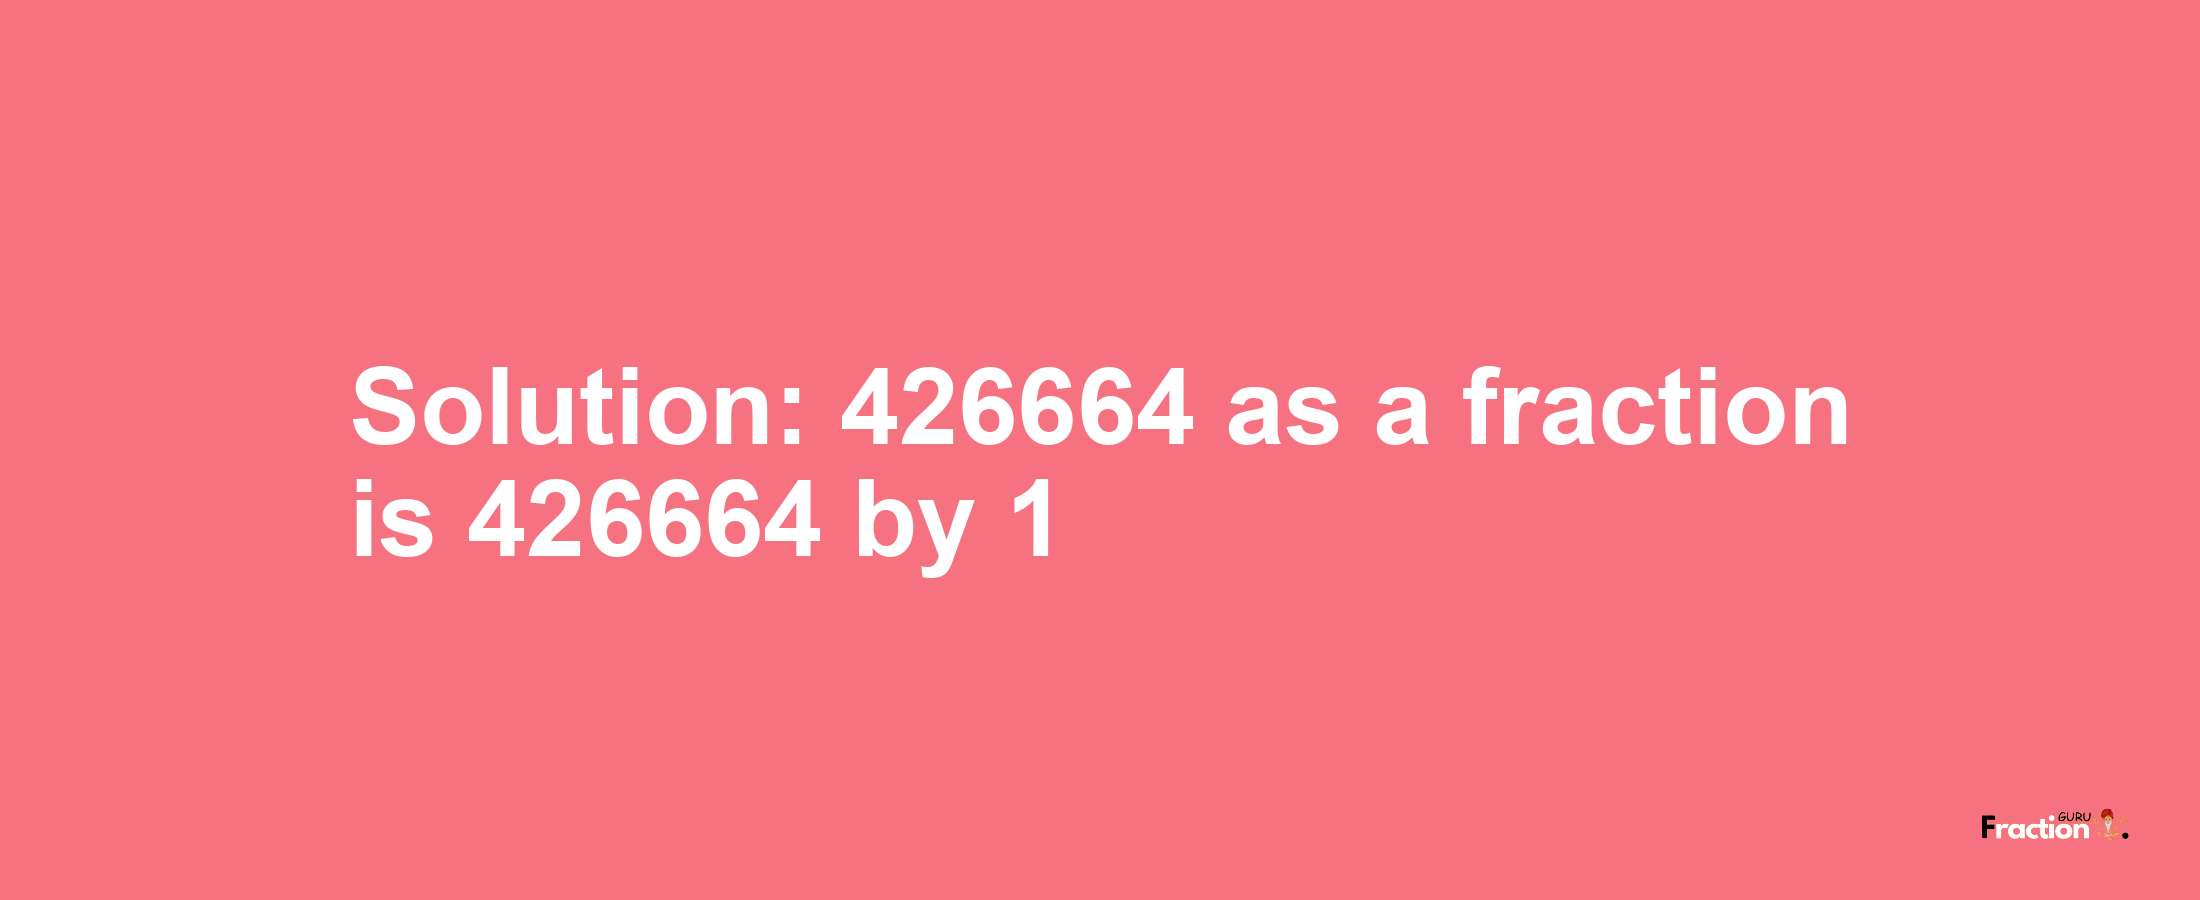 Solution:426664 as a fraction is 426664/1